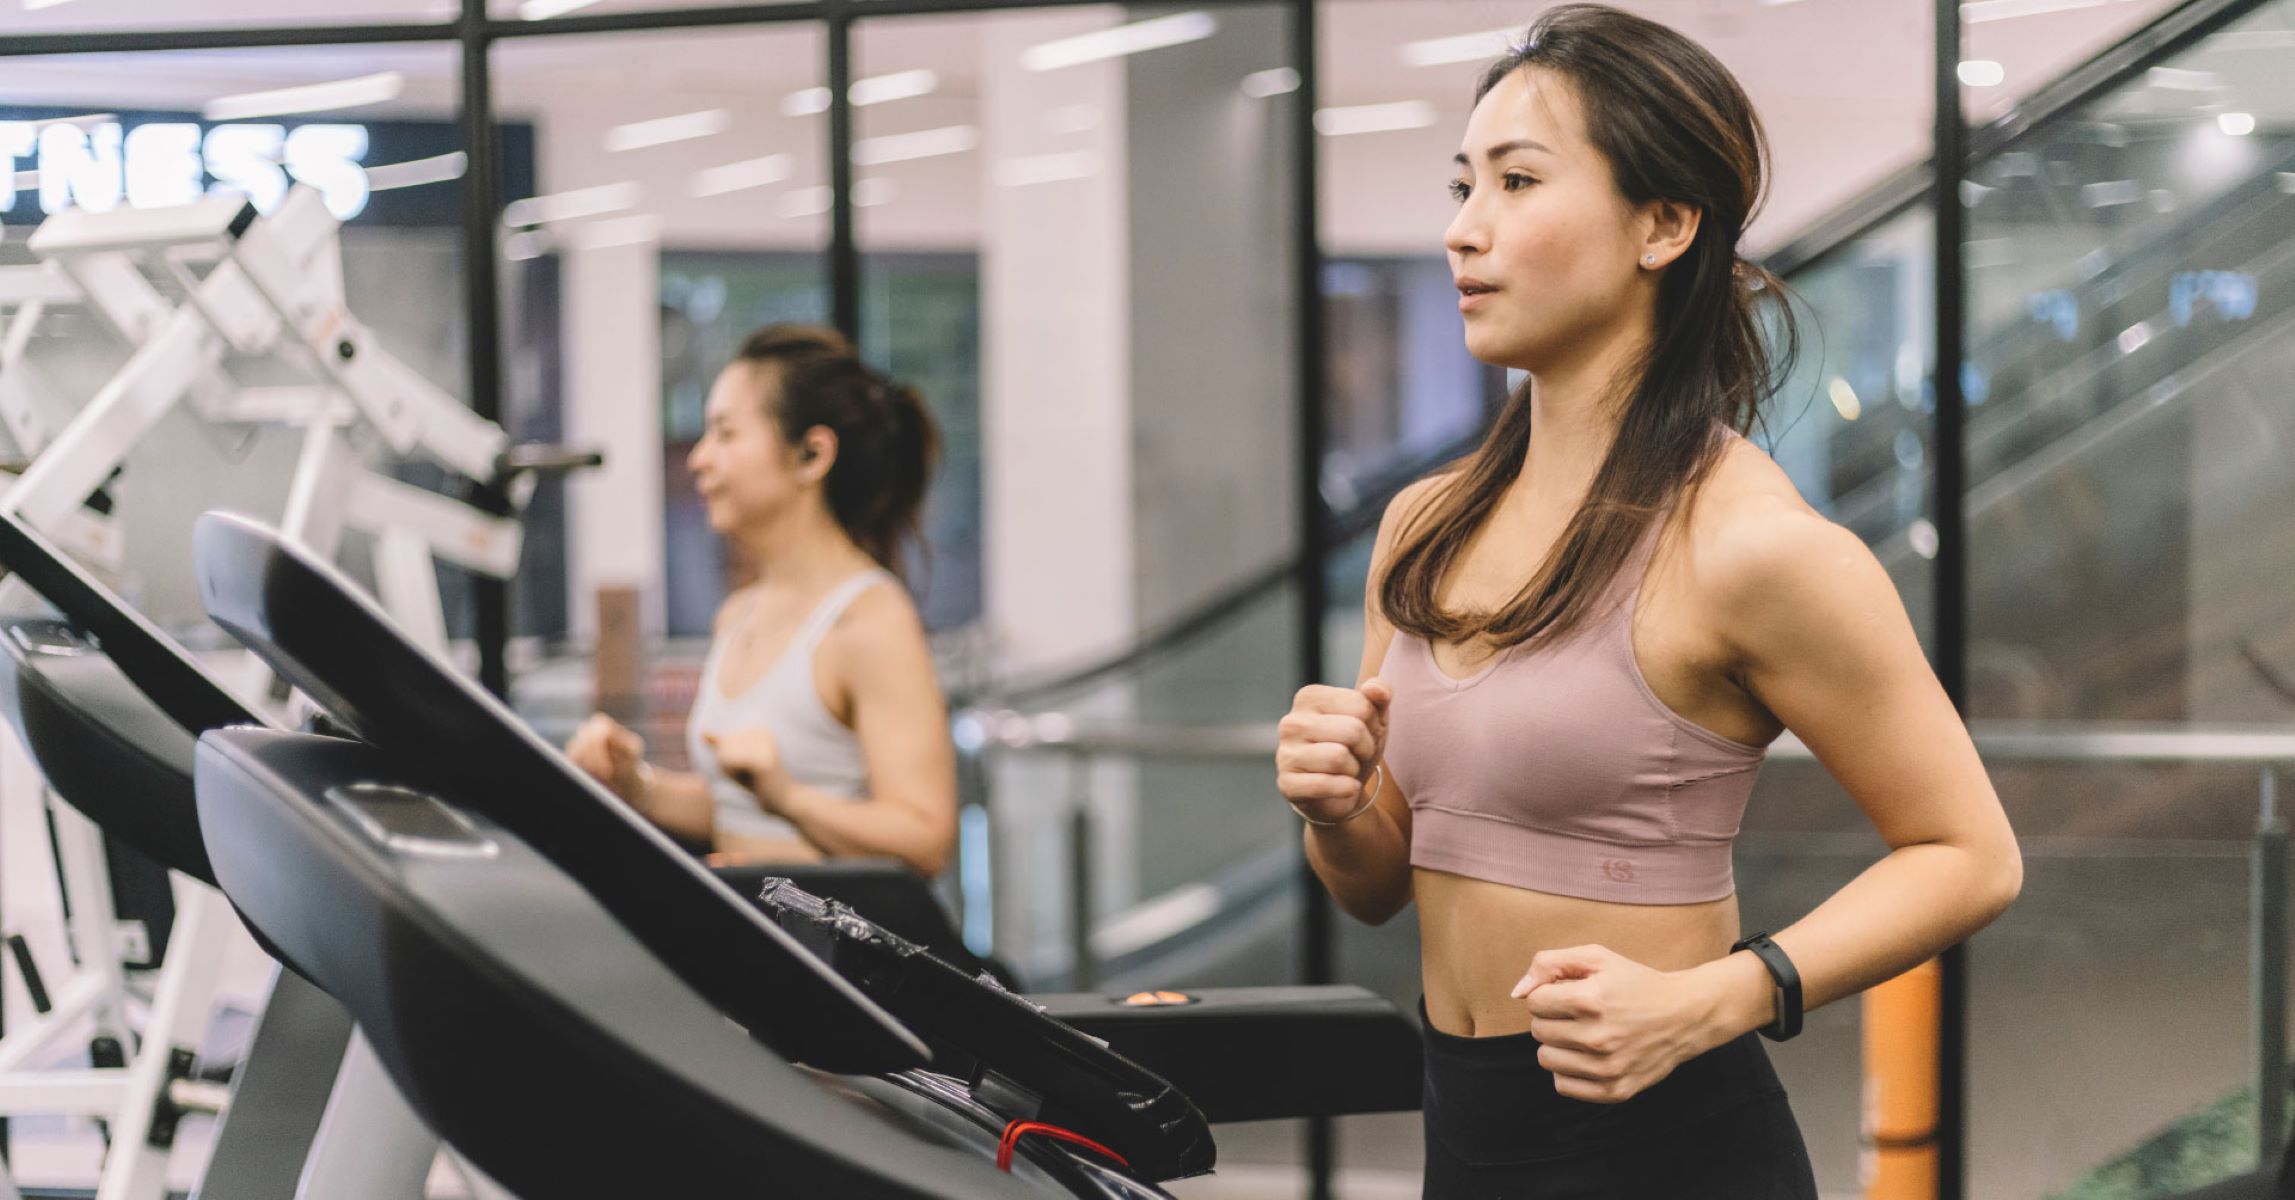 How To Start Jogging On A Treadmill